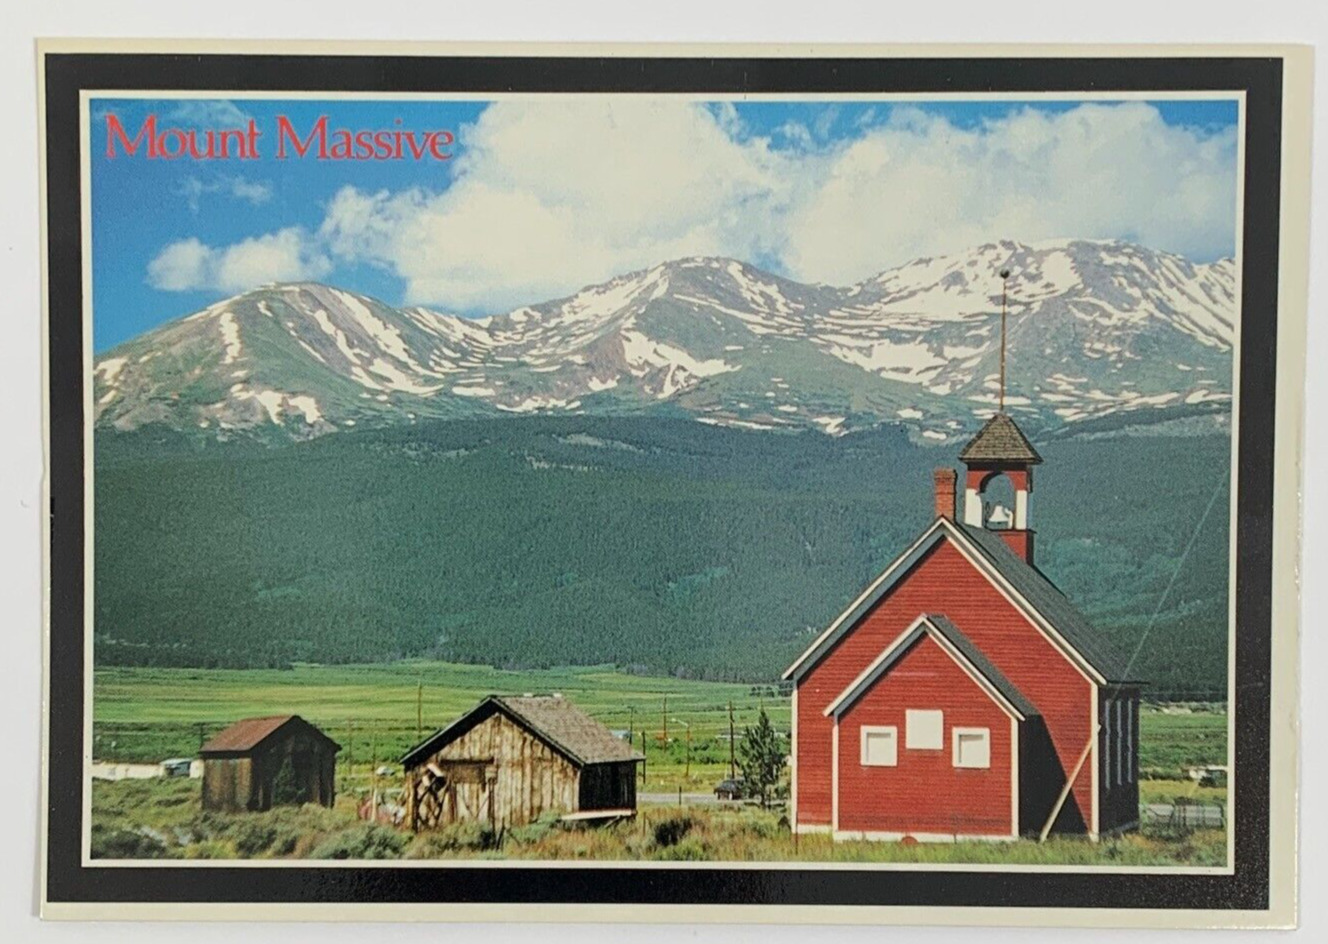 Mount Massive and old historic Schoolhouse in Leadville Colorado Postcard